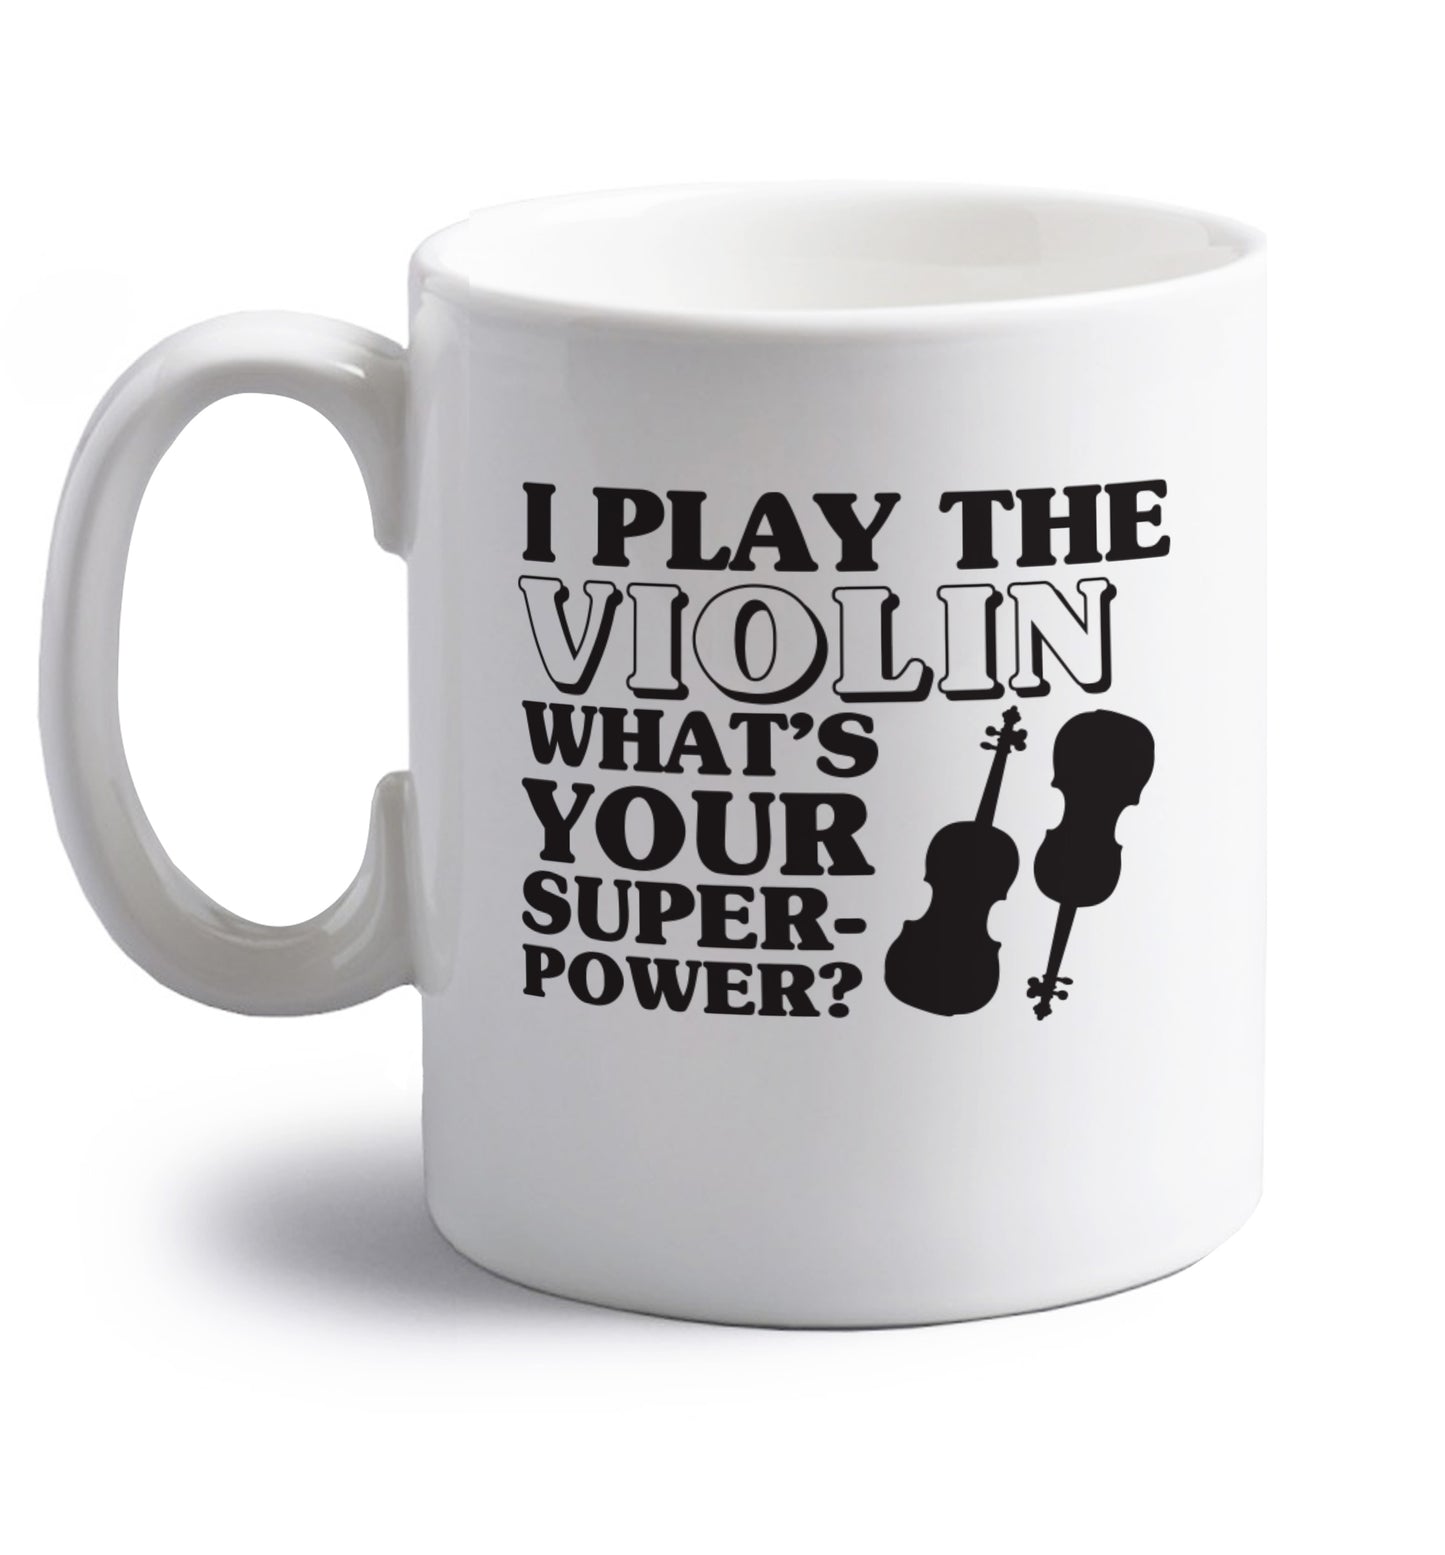 I Play Violin What's Your Superpower? right handed white ceramic mug 